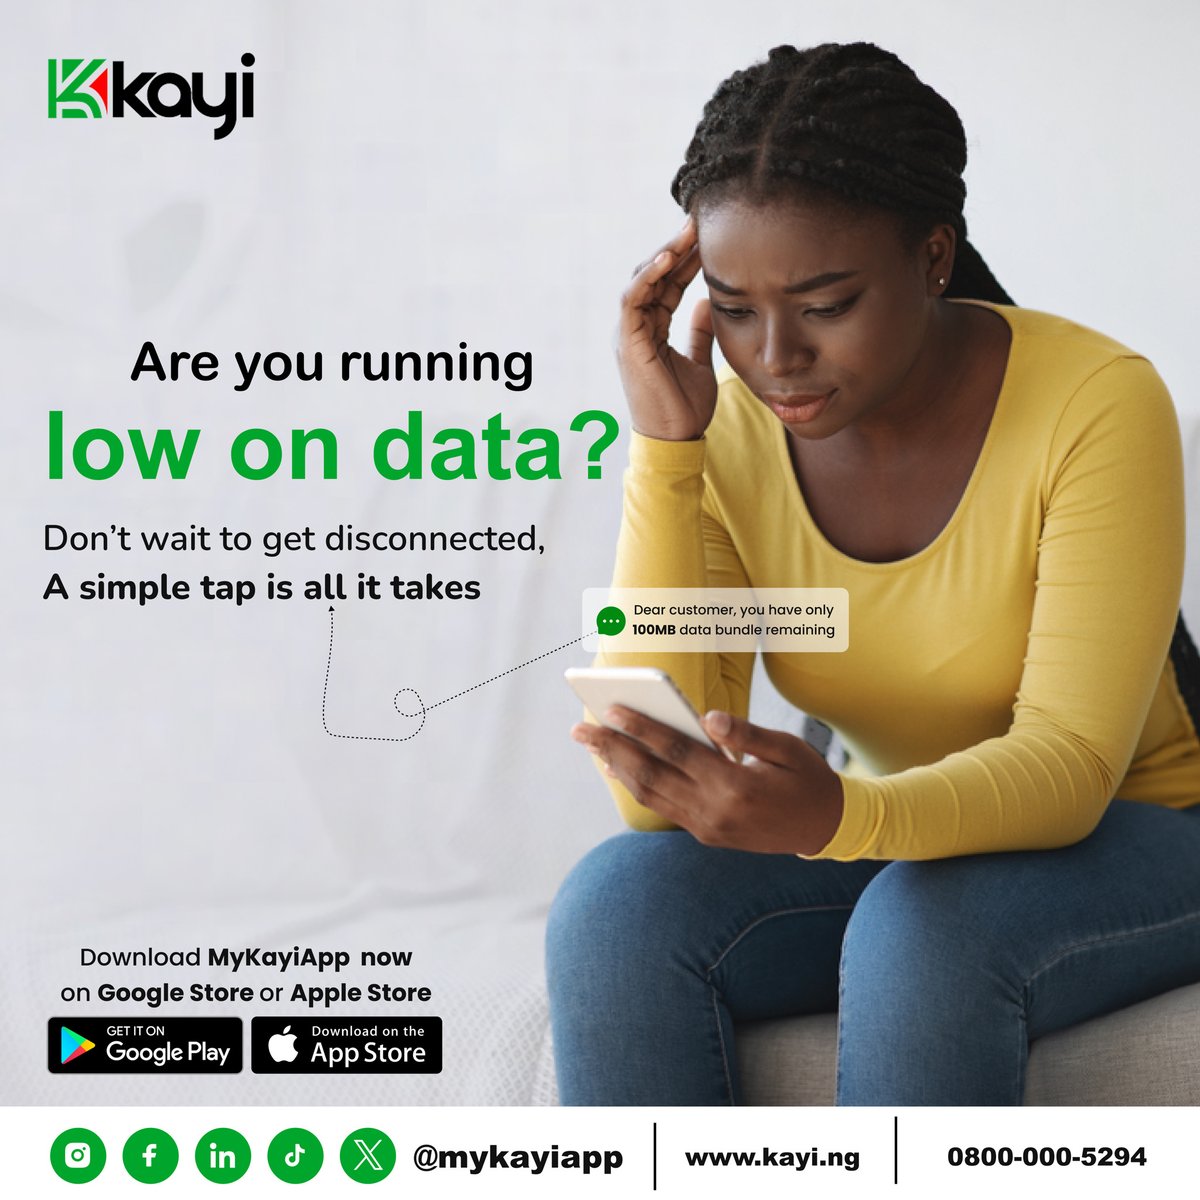 Running low on data? No problem! With Kayiapp, buying data is as easy as a few taps on your phone. No matter where you are, stay online, stay informed, and stay connected without any hassle. Never miss out on staying in the loop!

#BuyData
#Mykayiapp
#Kayiway
#Digitalbanking